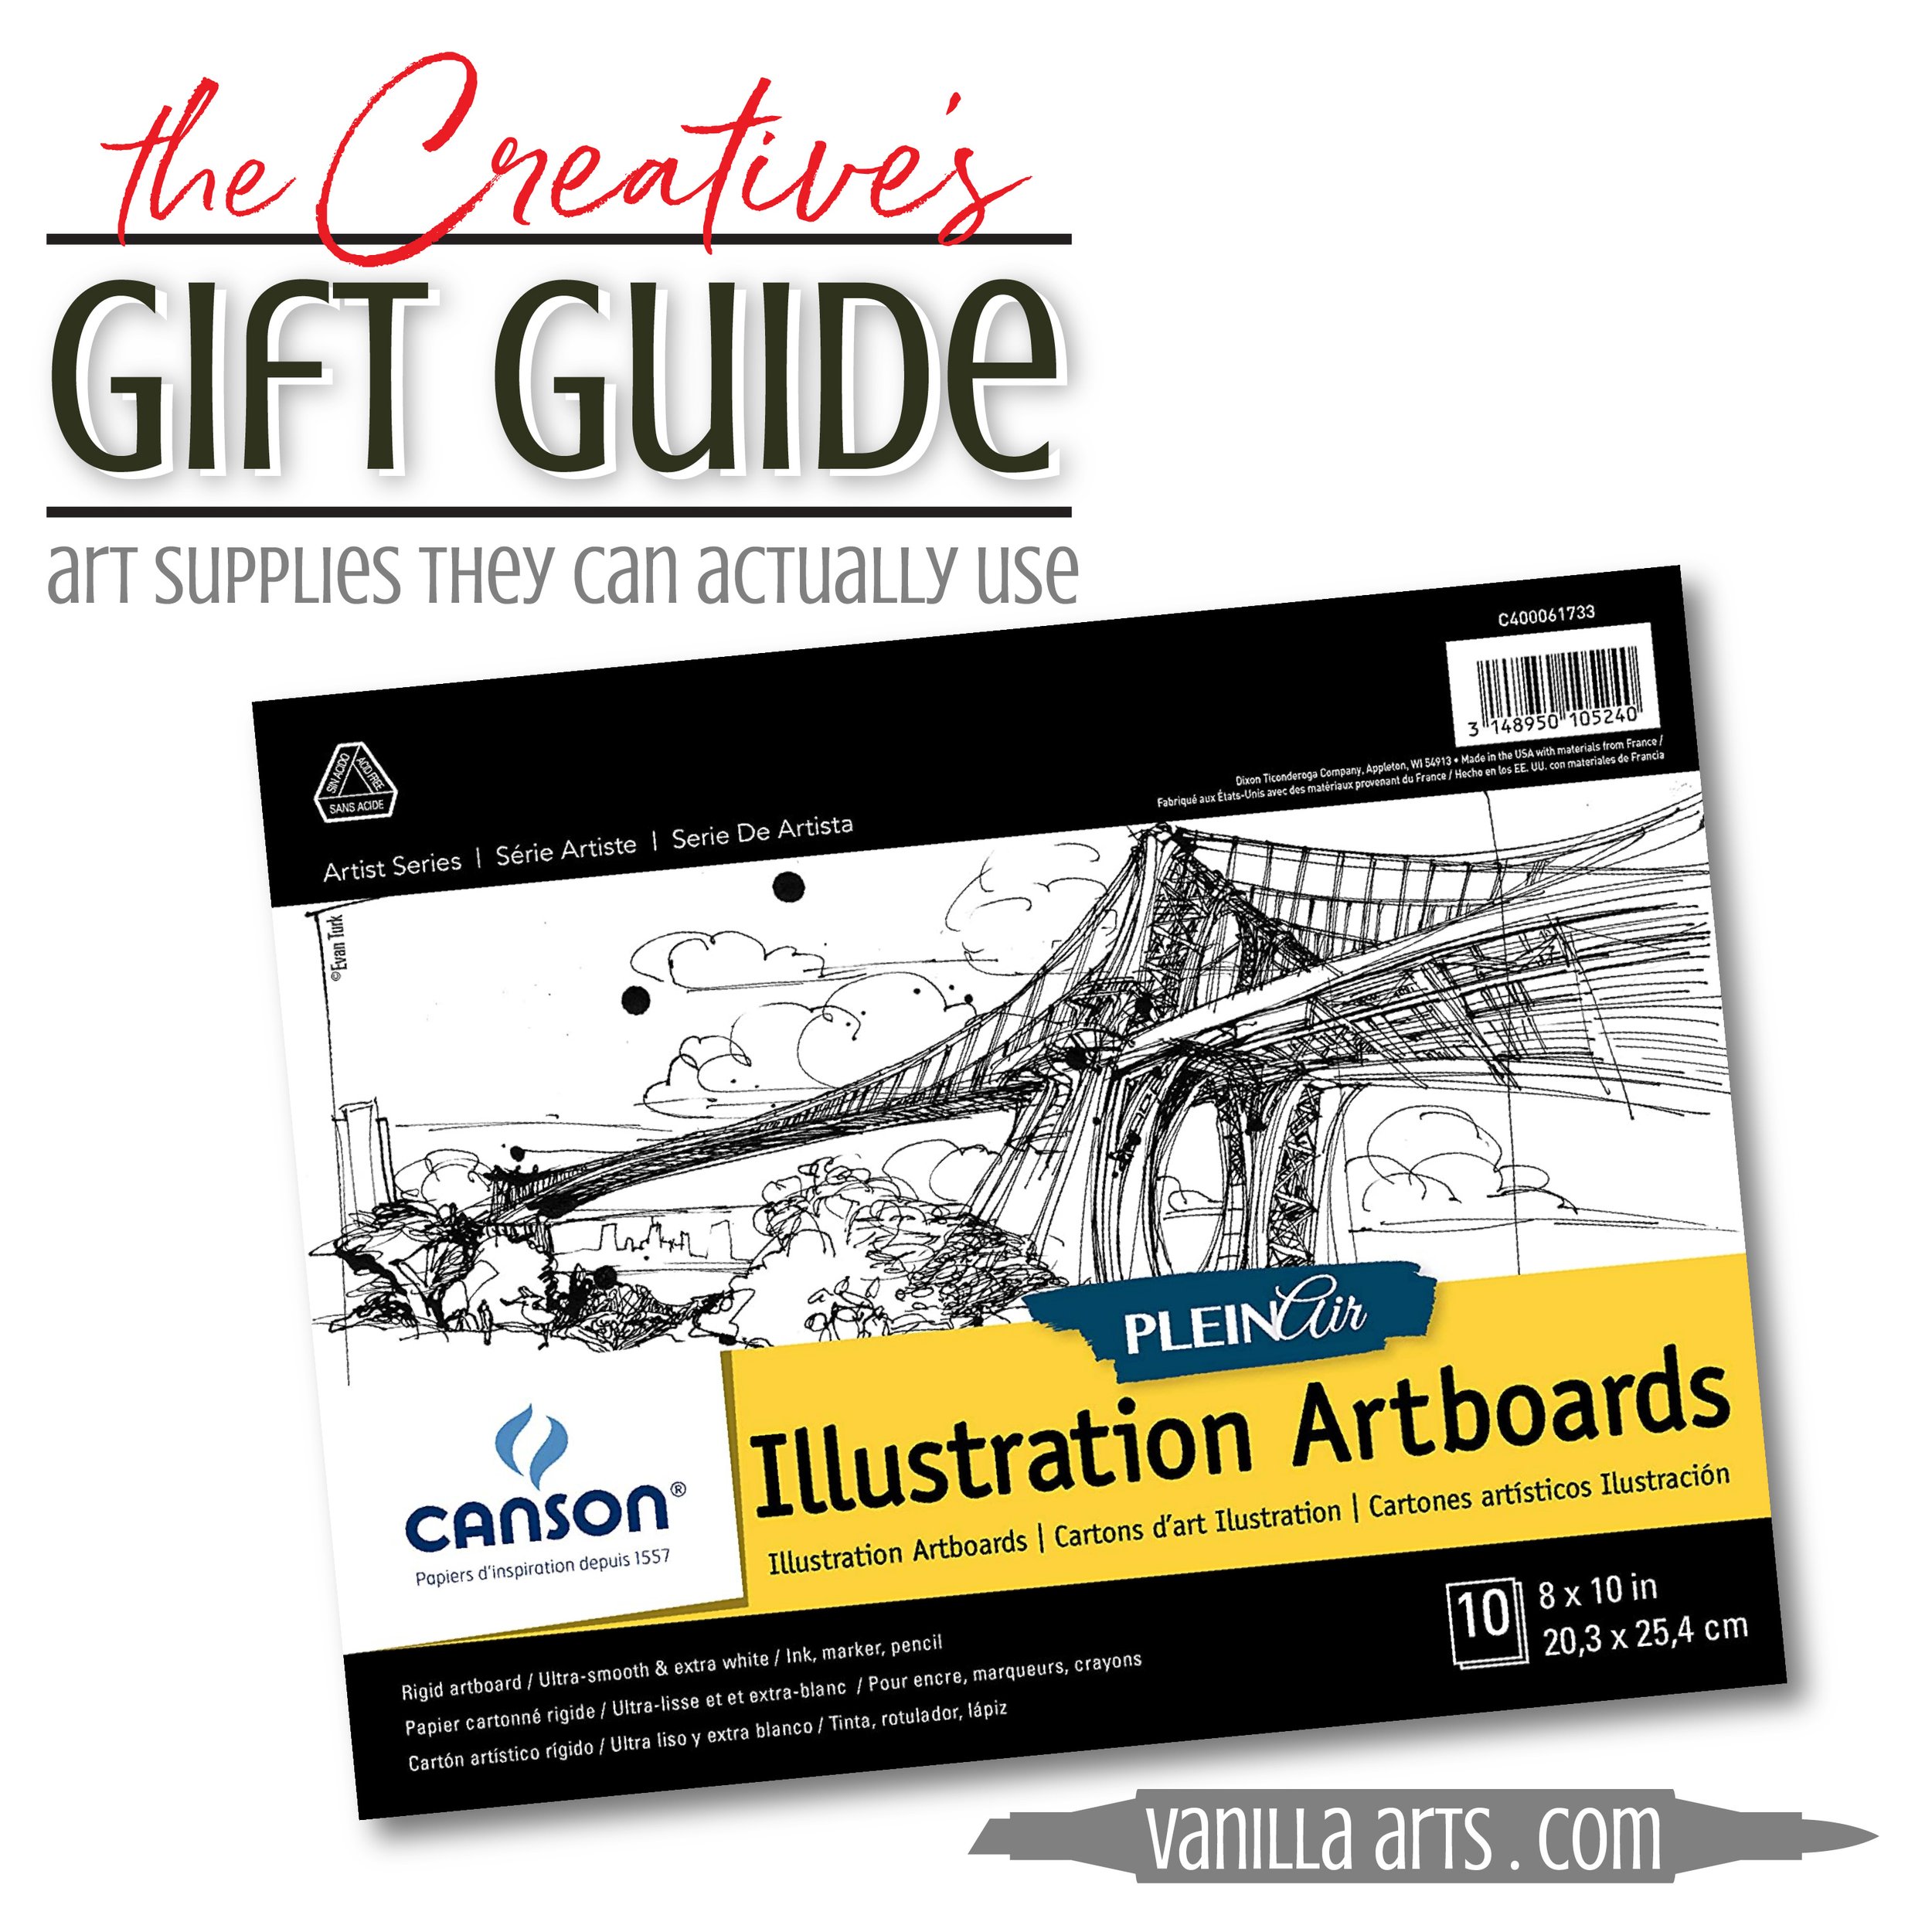 8 unique gifts for artists